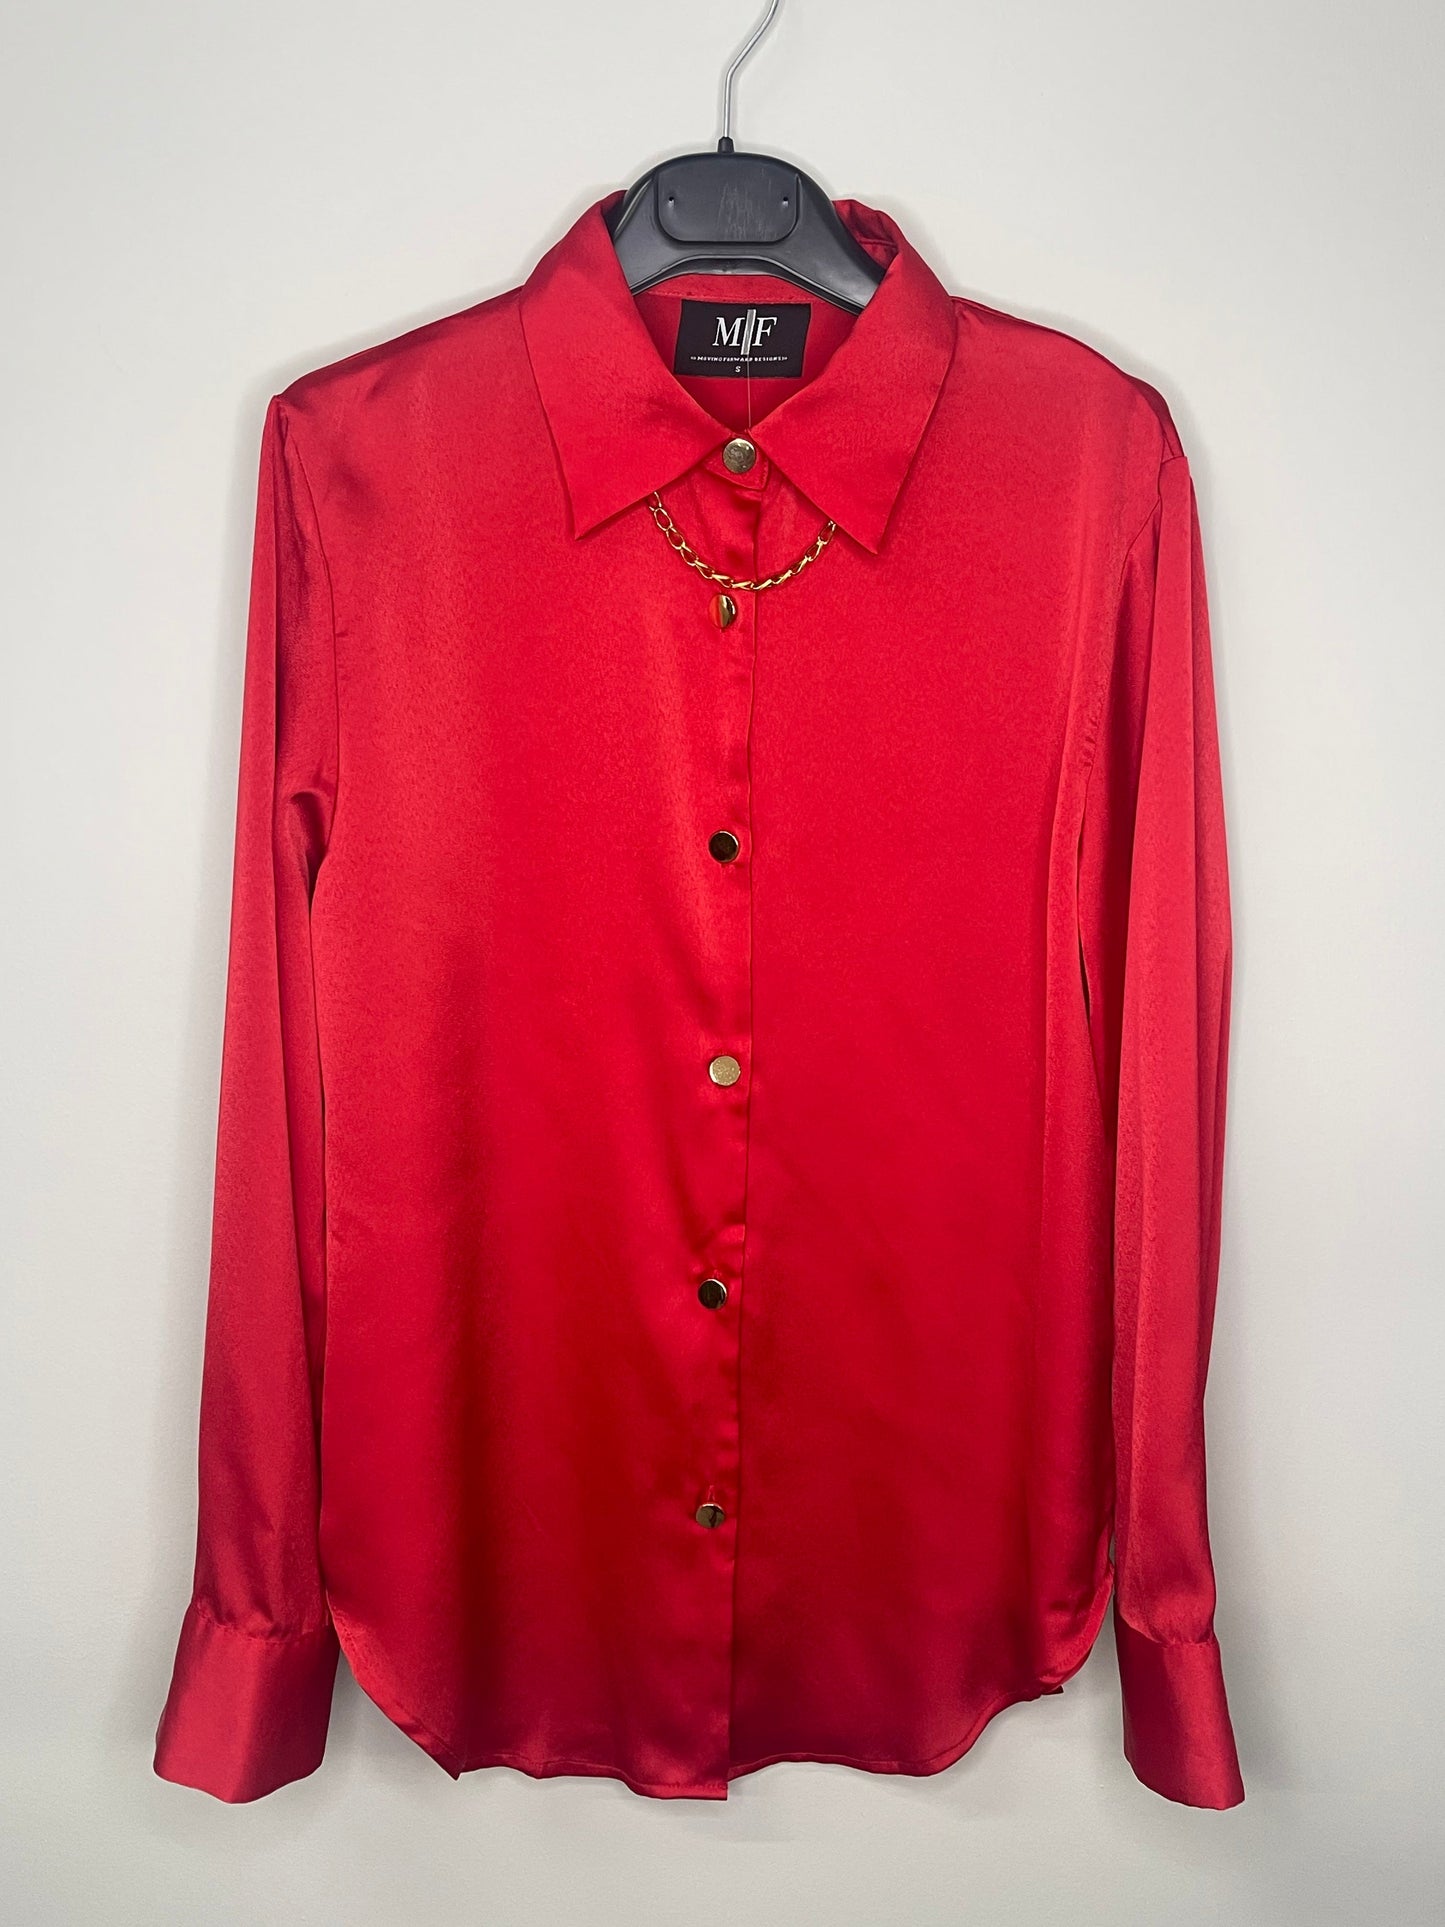 Shirt, Silky Red, Gold Chain/Buttons